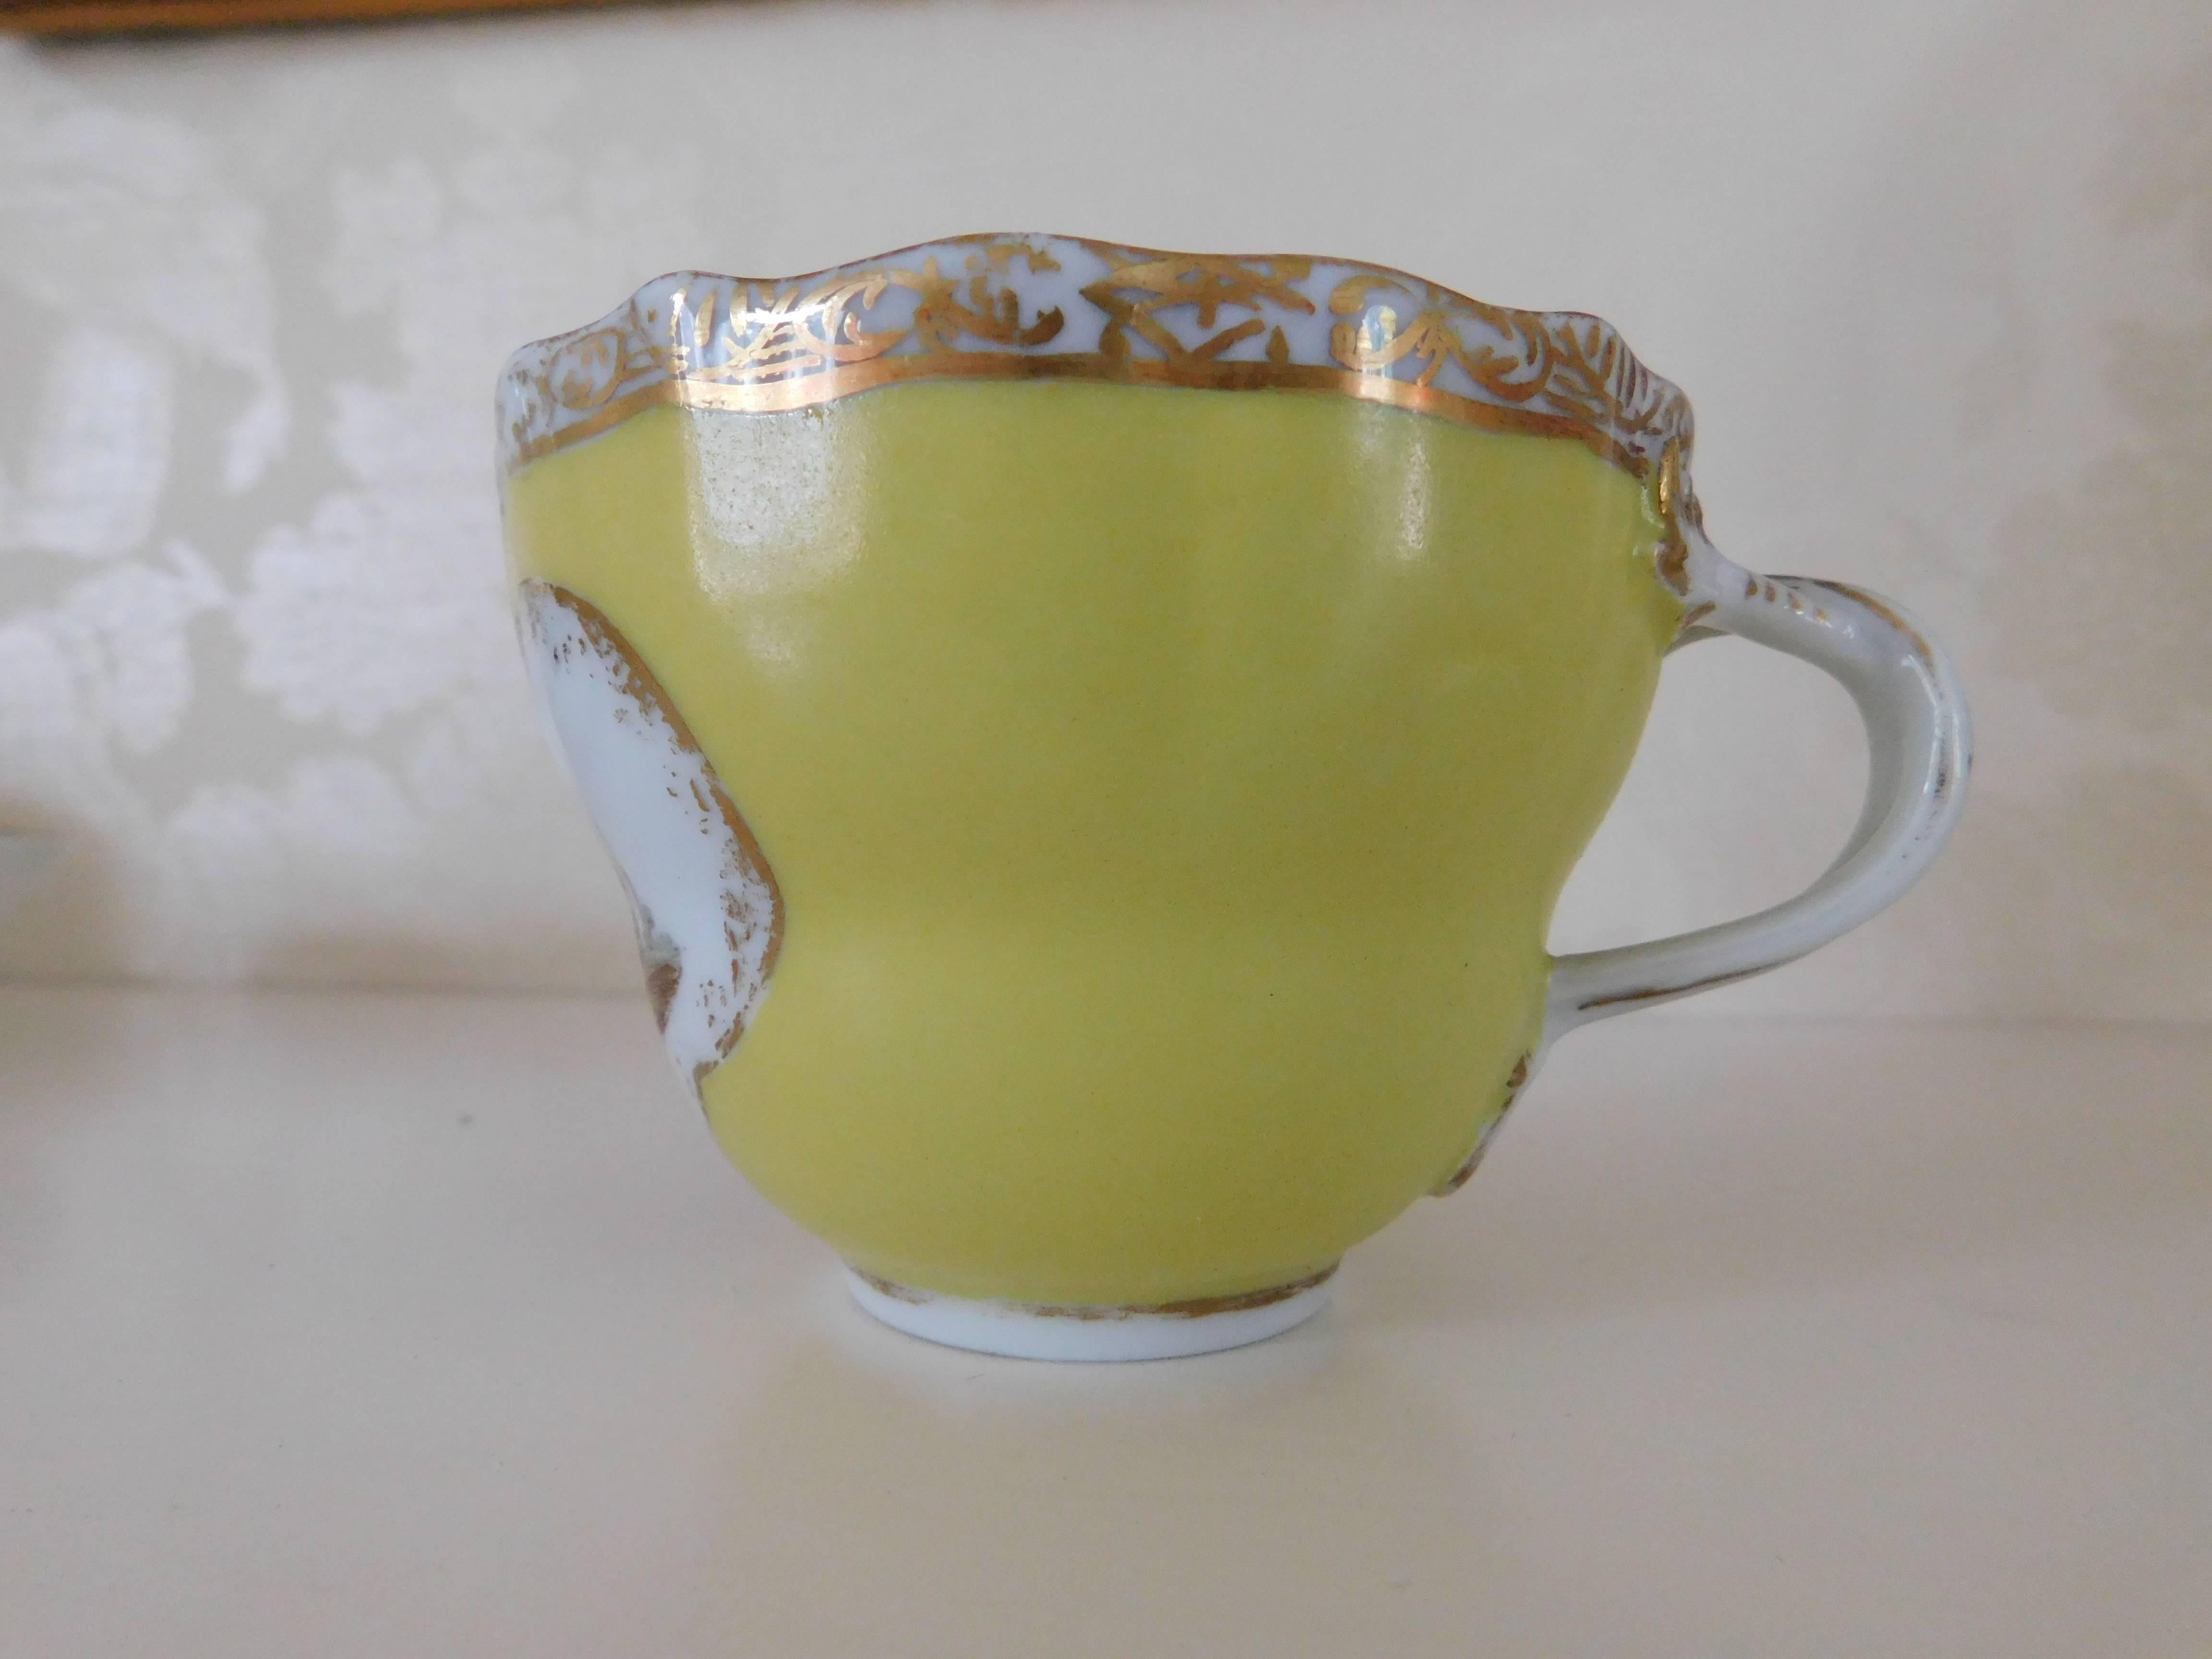 19th Century, Meissen Porcelain Cup and Saucer In Good Condition For Sale In Washington Crossing, PA